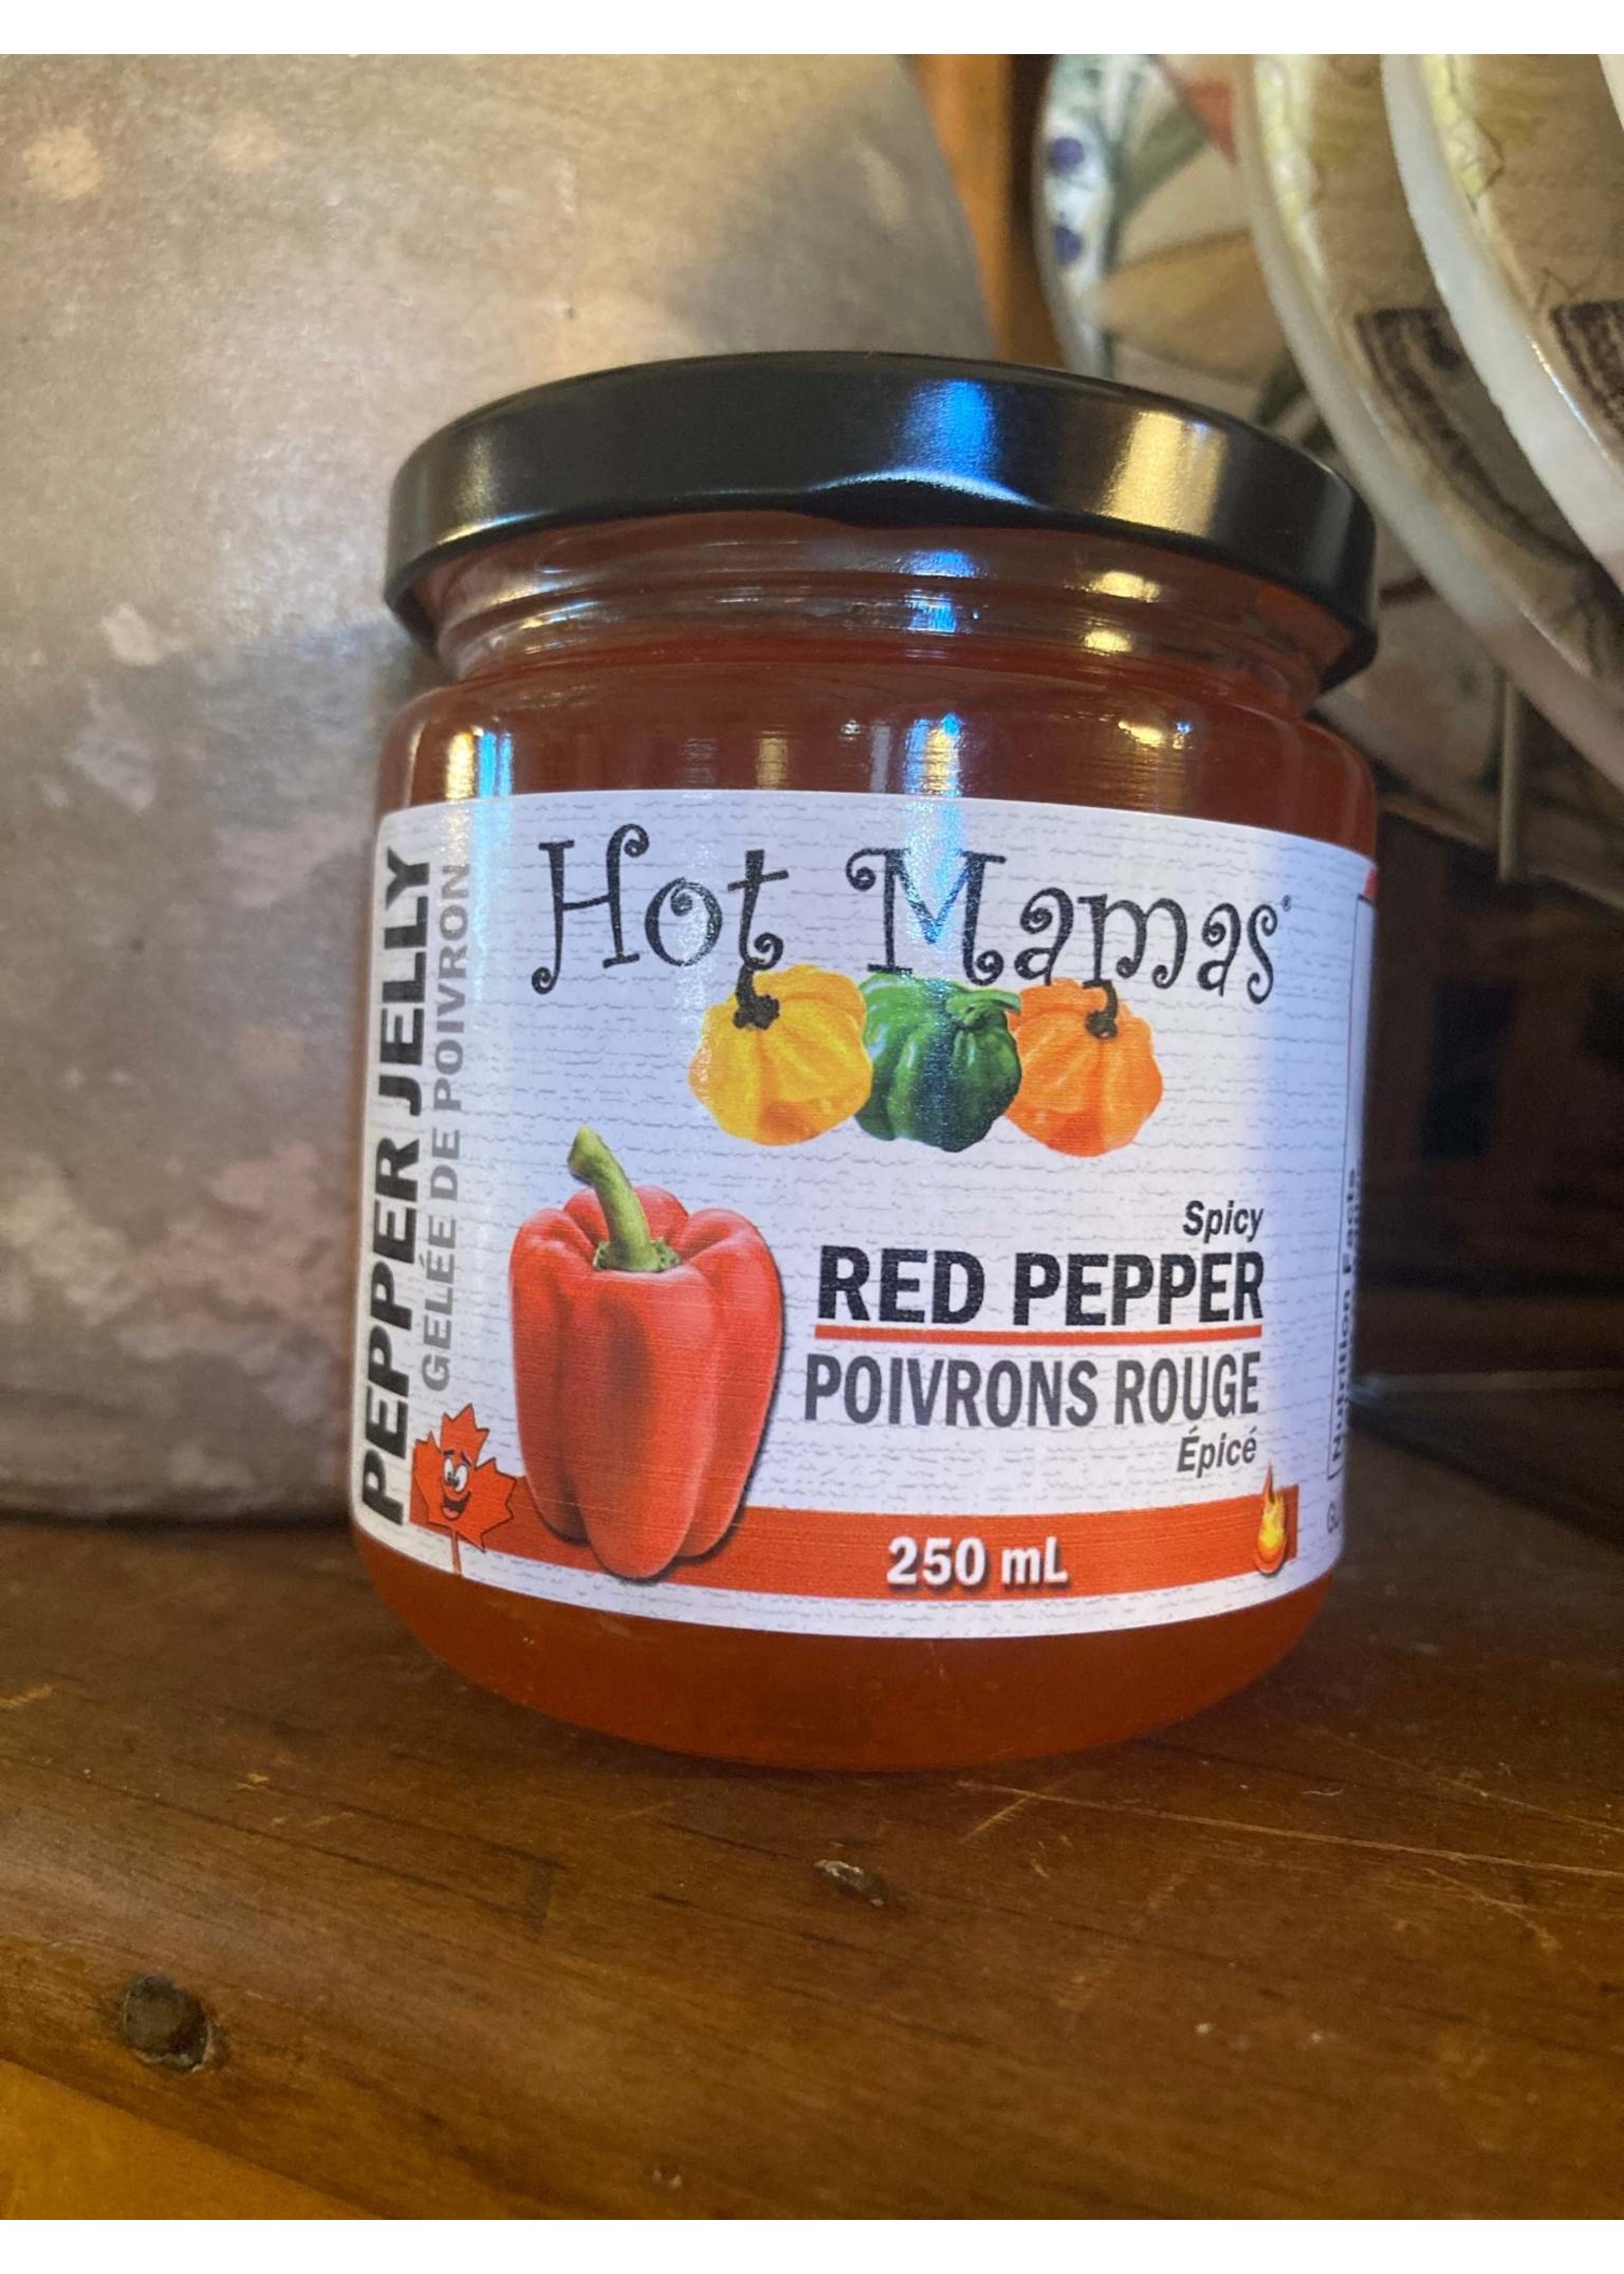 Hot Mamas’ Spicy Red Pepper Jelly